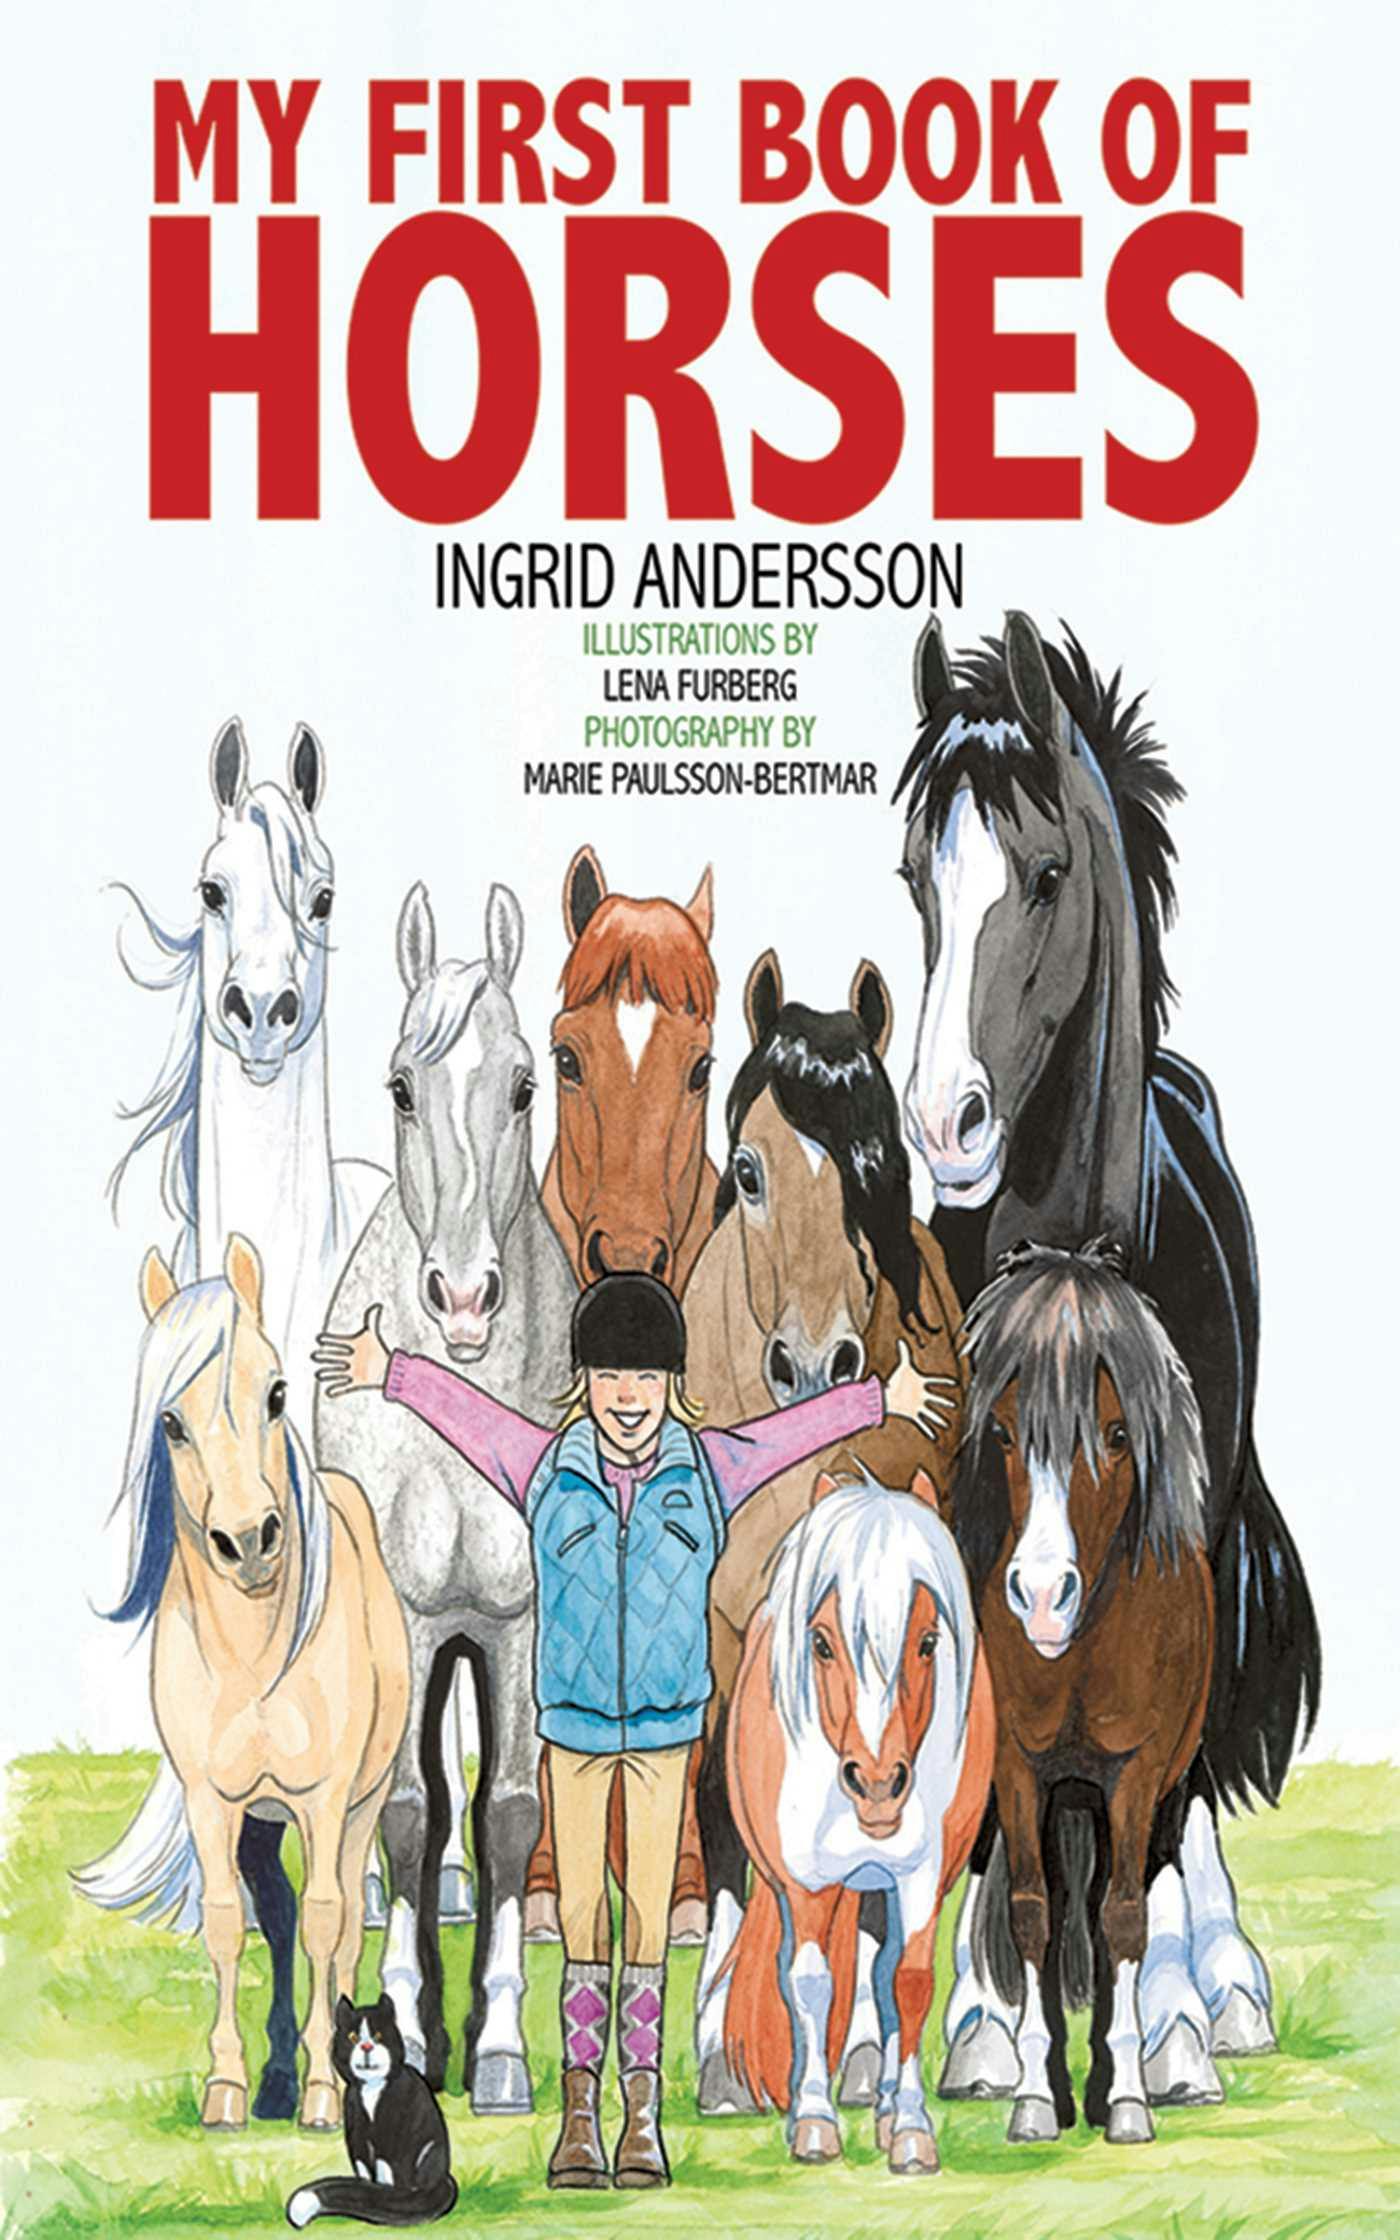 My First Book of Horses - Ingrid Andersson